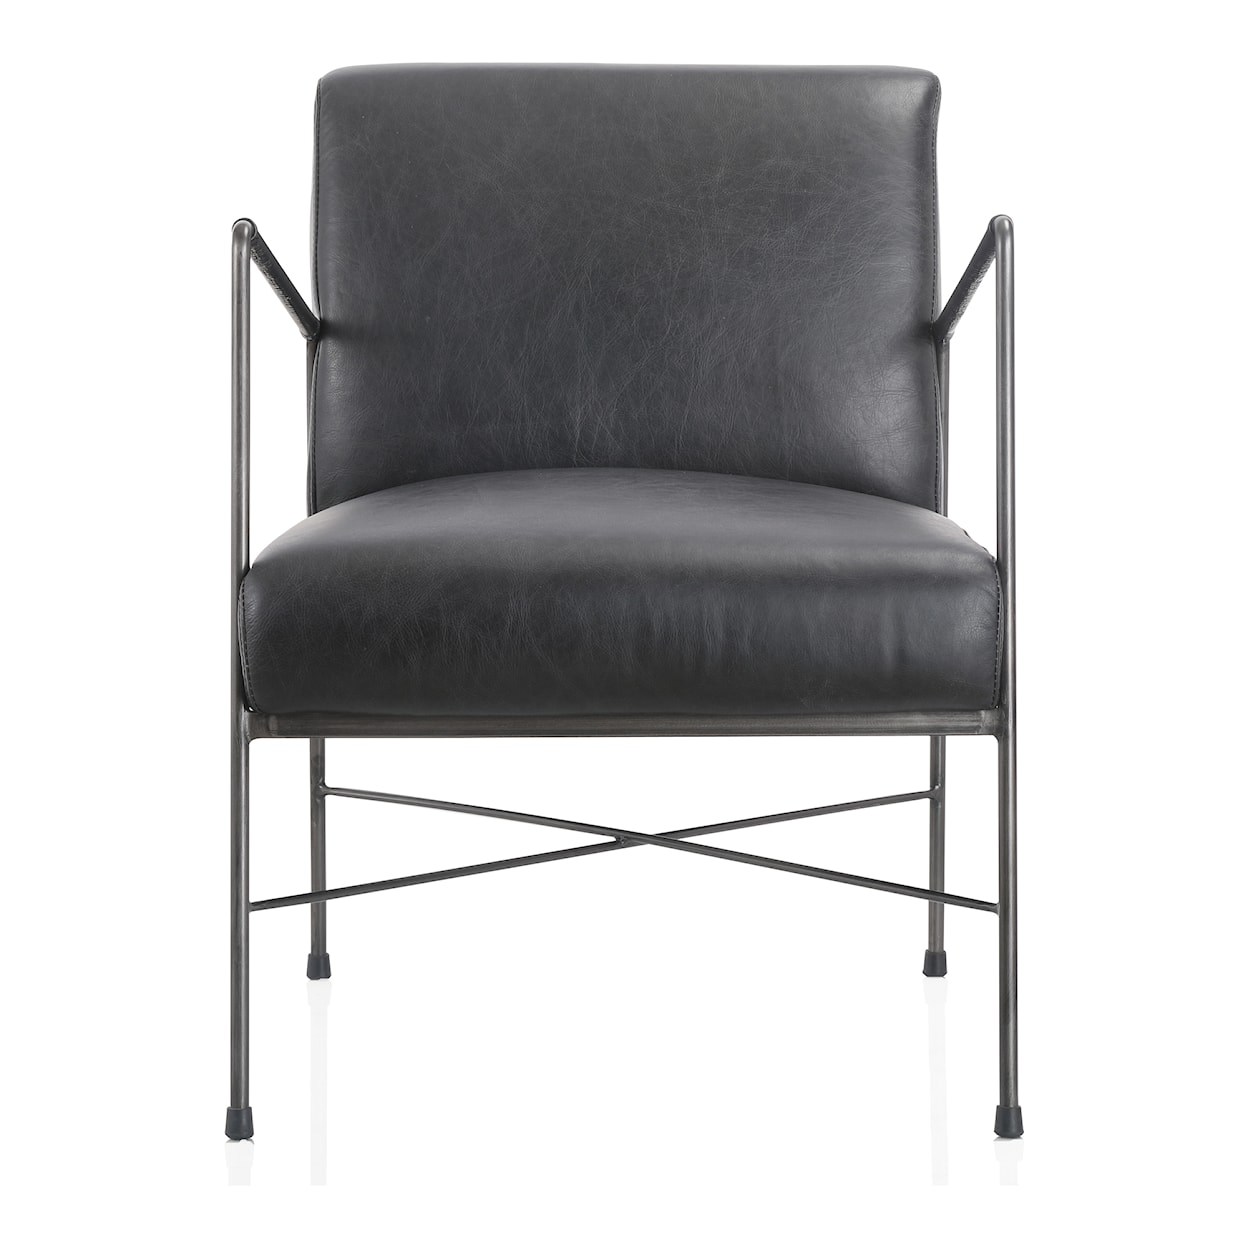 Moe's Home Collection Dagwood Dagwood Leather Arm Chair Onyx Black Leather